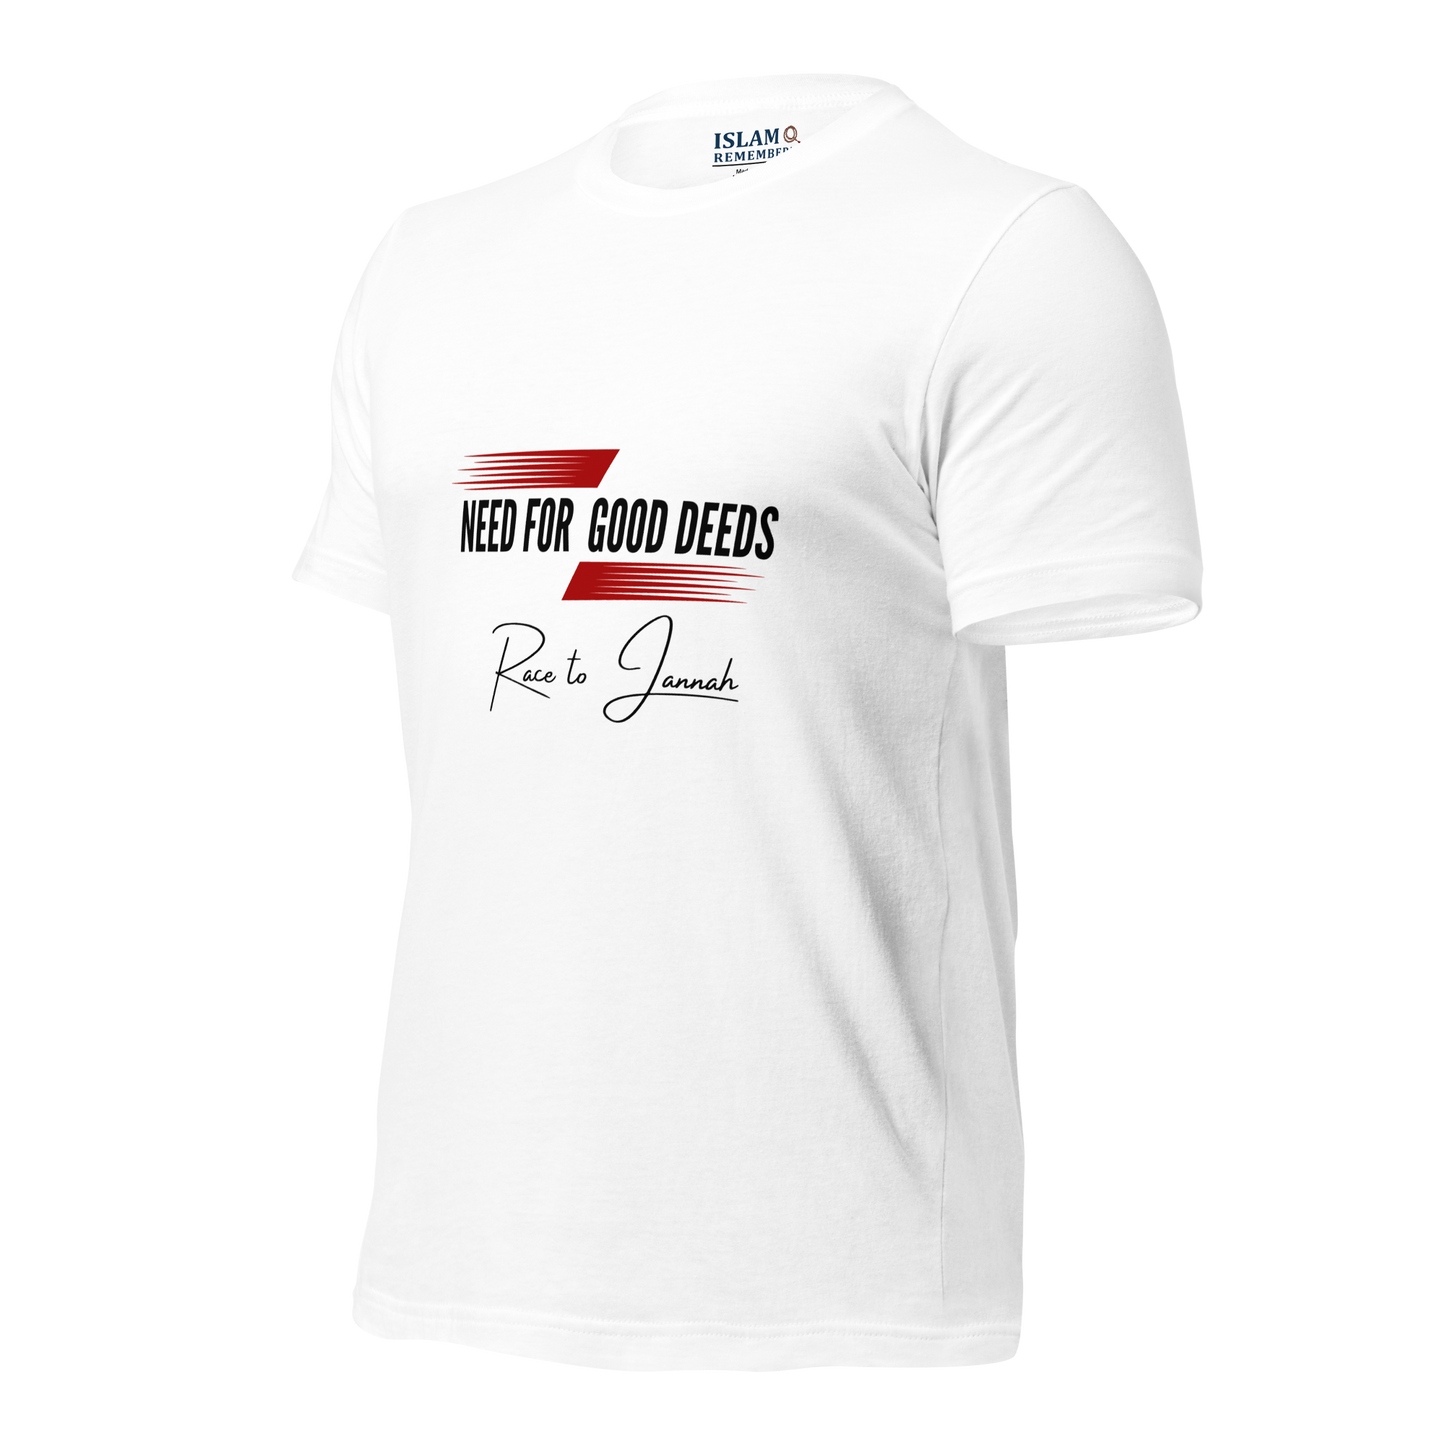 ADULT T-Shirt - NEED FOR GOOD DEEDS - Black/Red